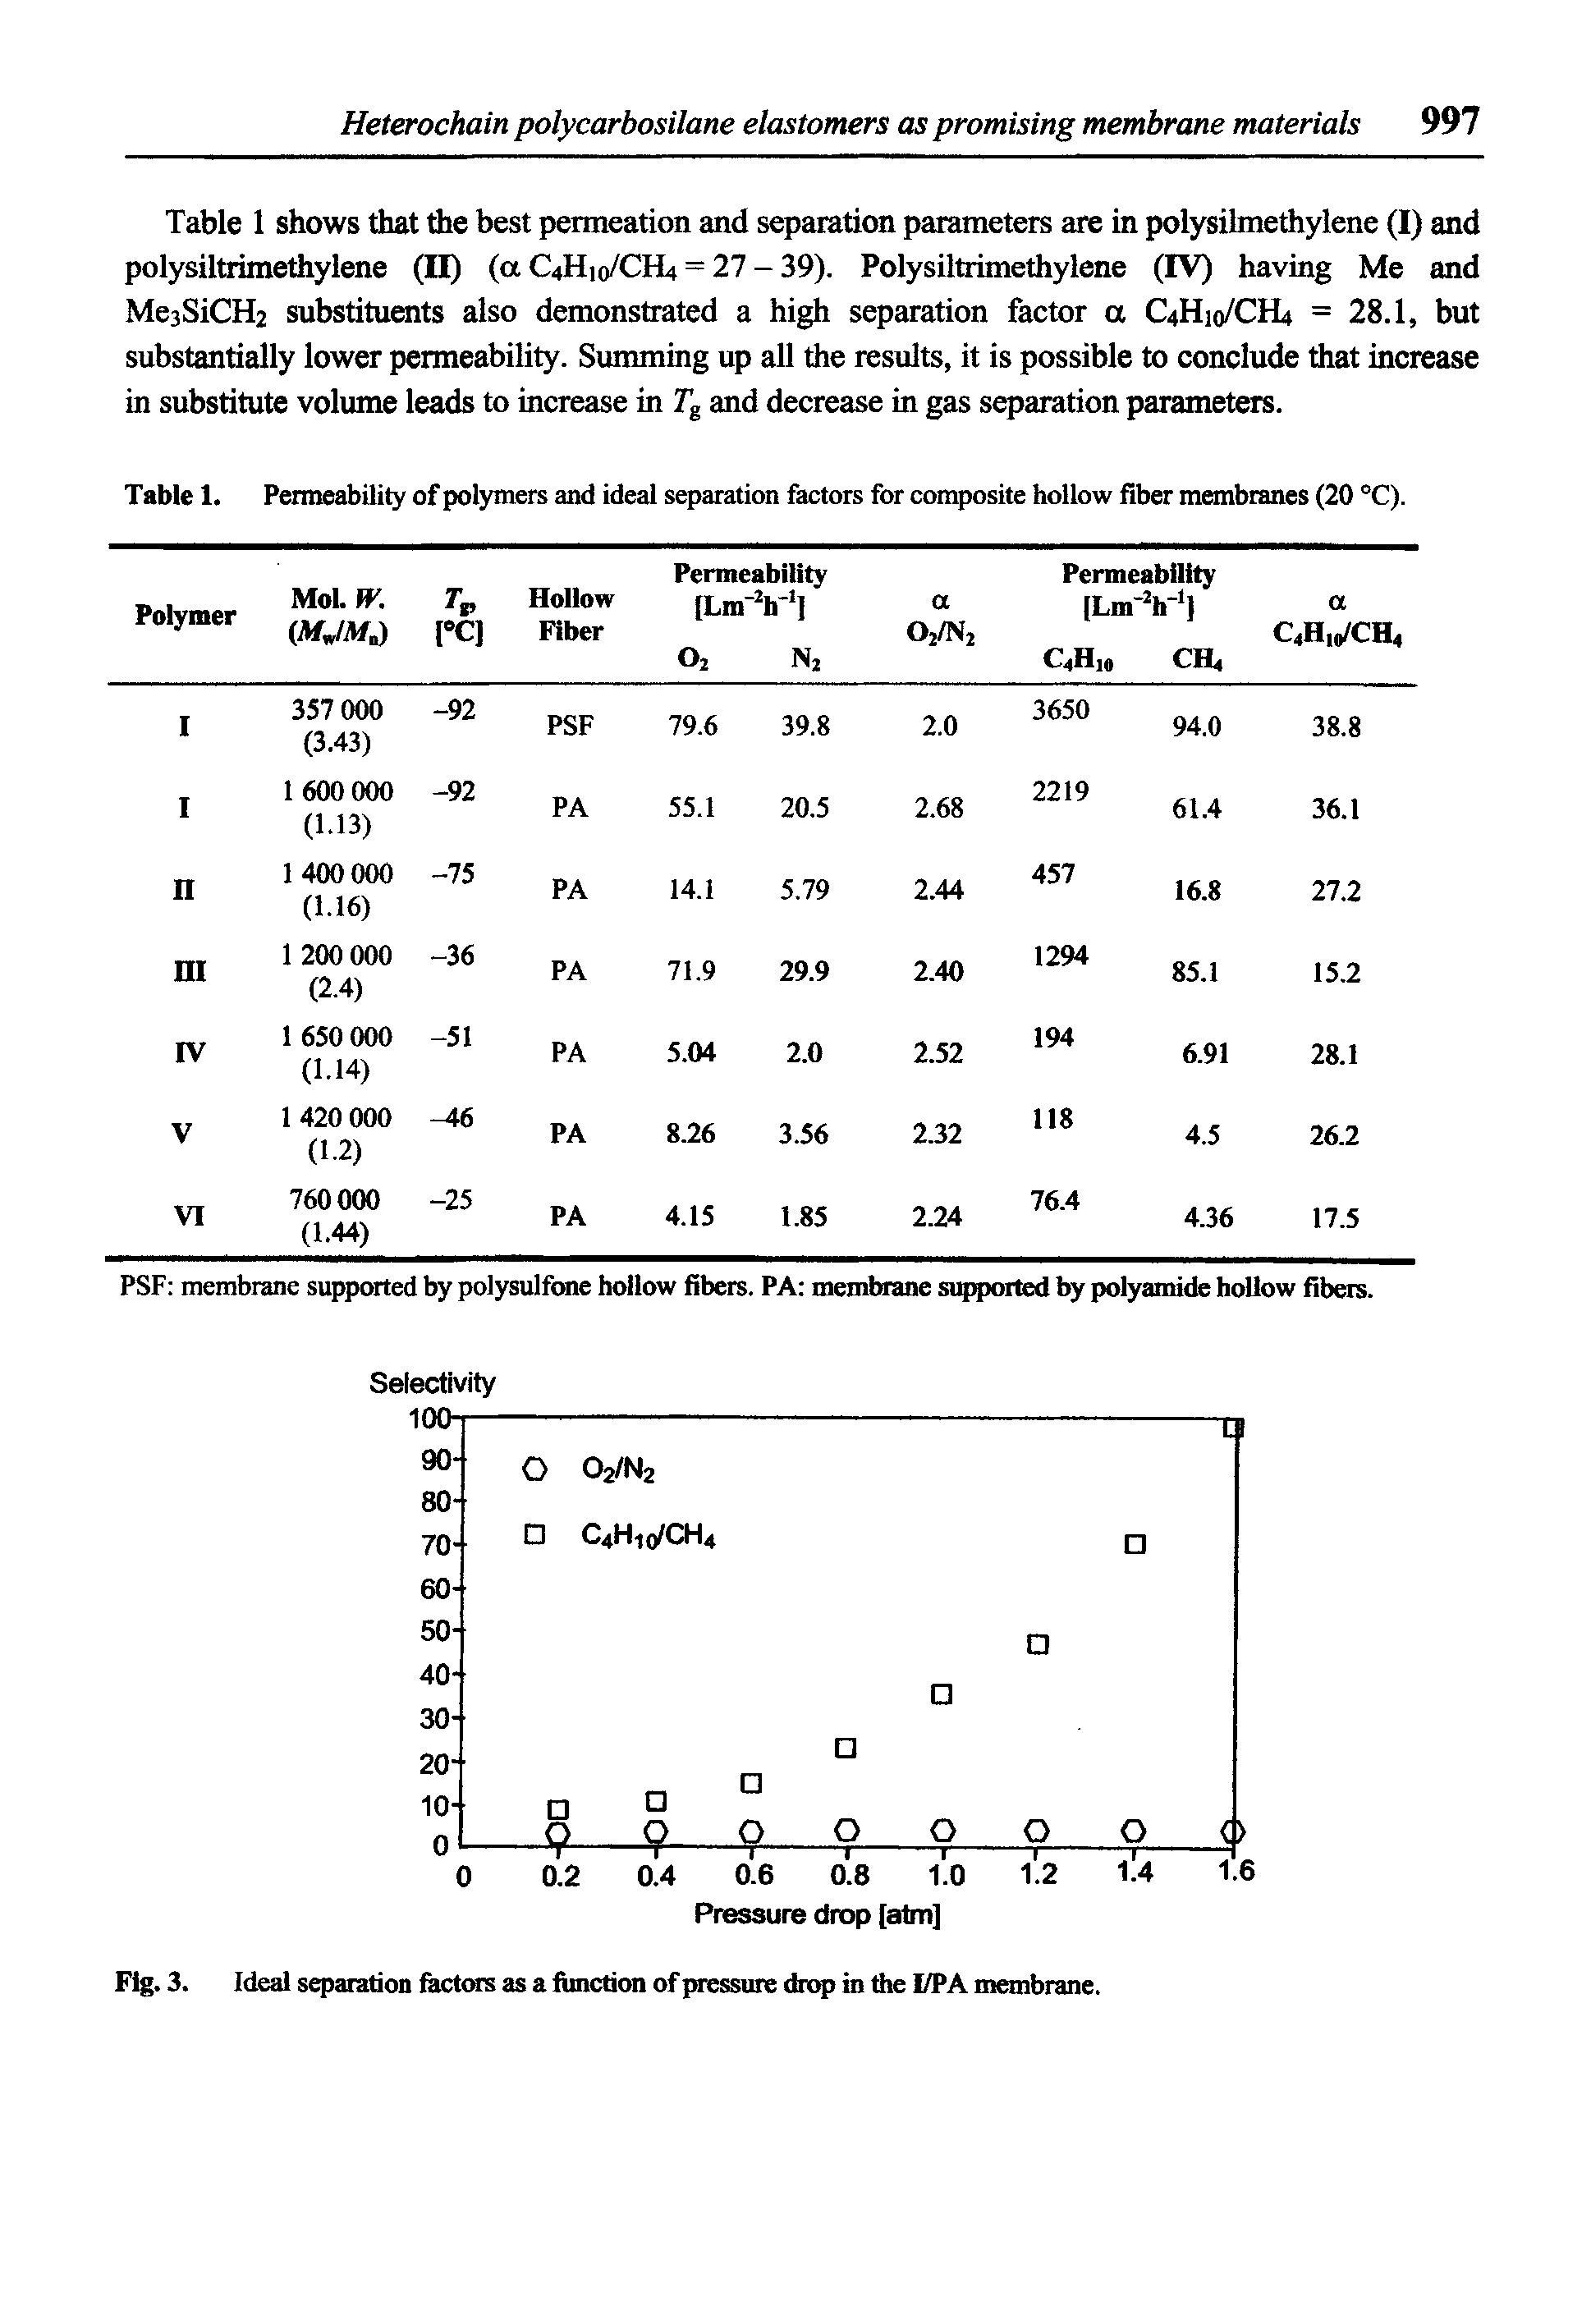 Table 1. Penneability of polymers and ideal separation factors for composite hollow fiber membranes (20 °C).